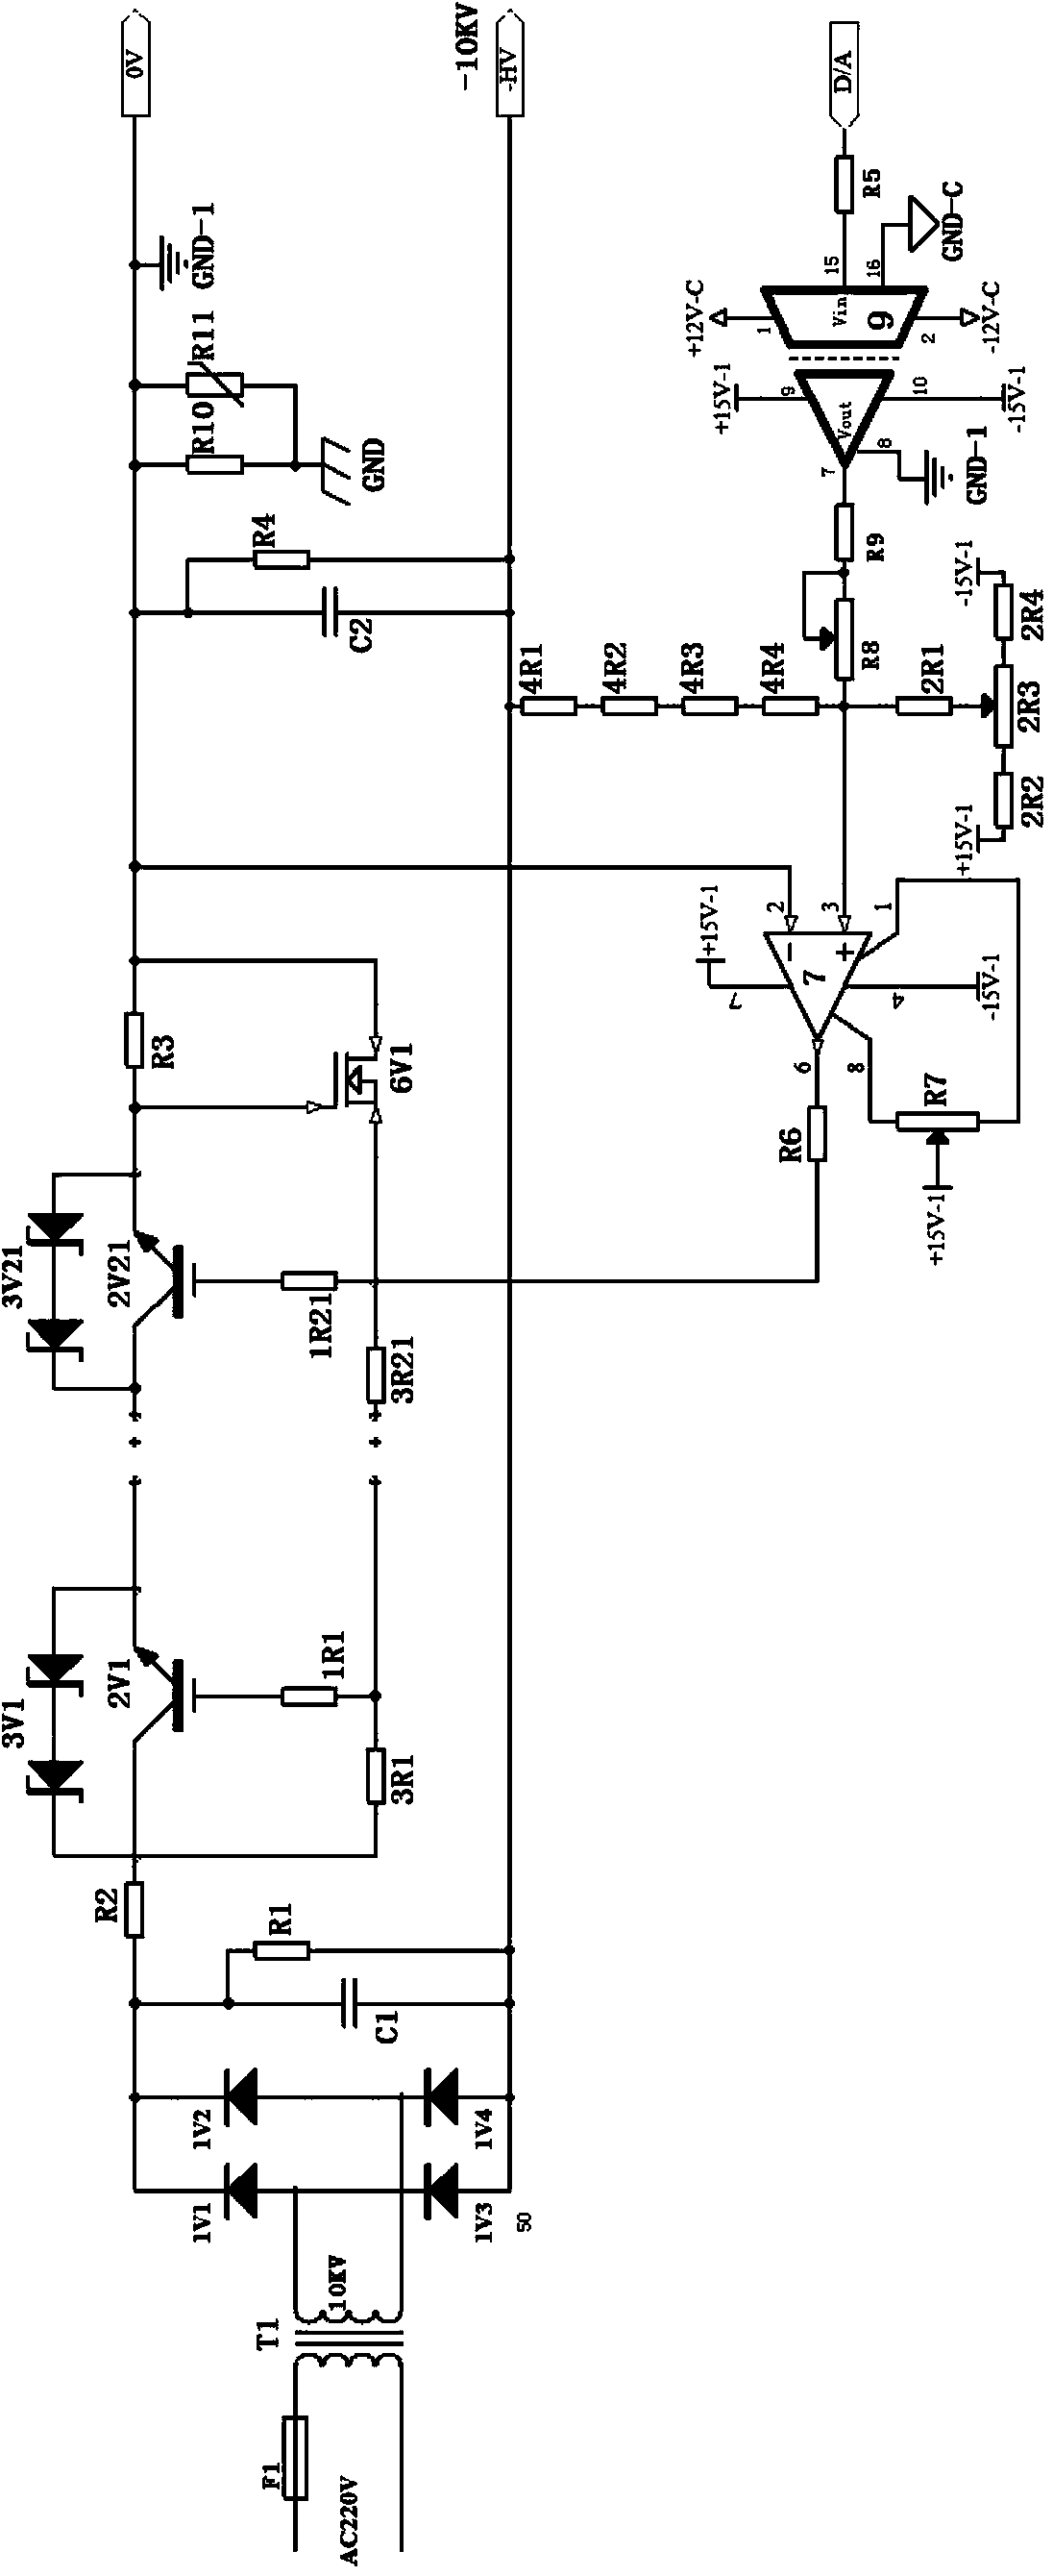 Linear high voltage direct current stabilized power supply with IGBT as pass transistor